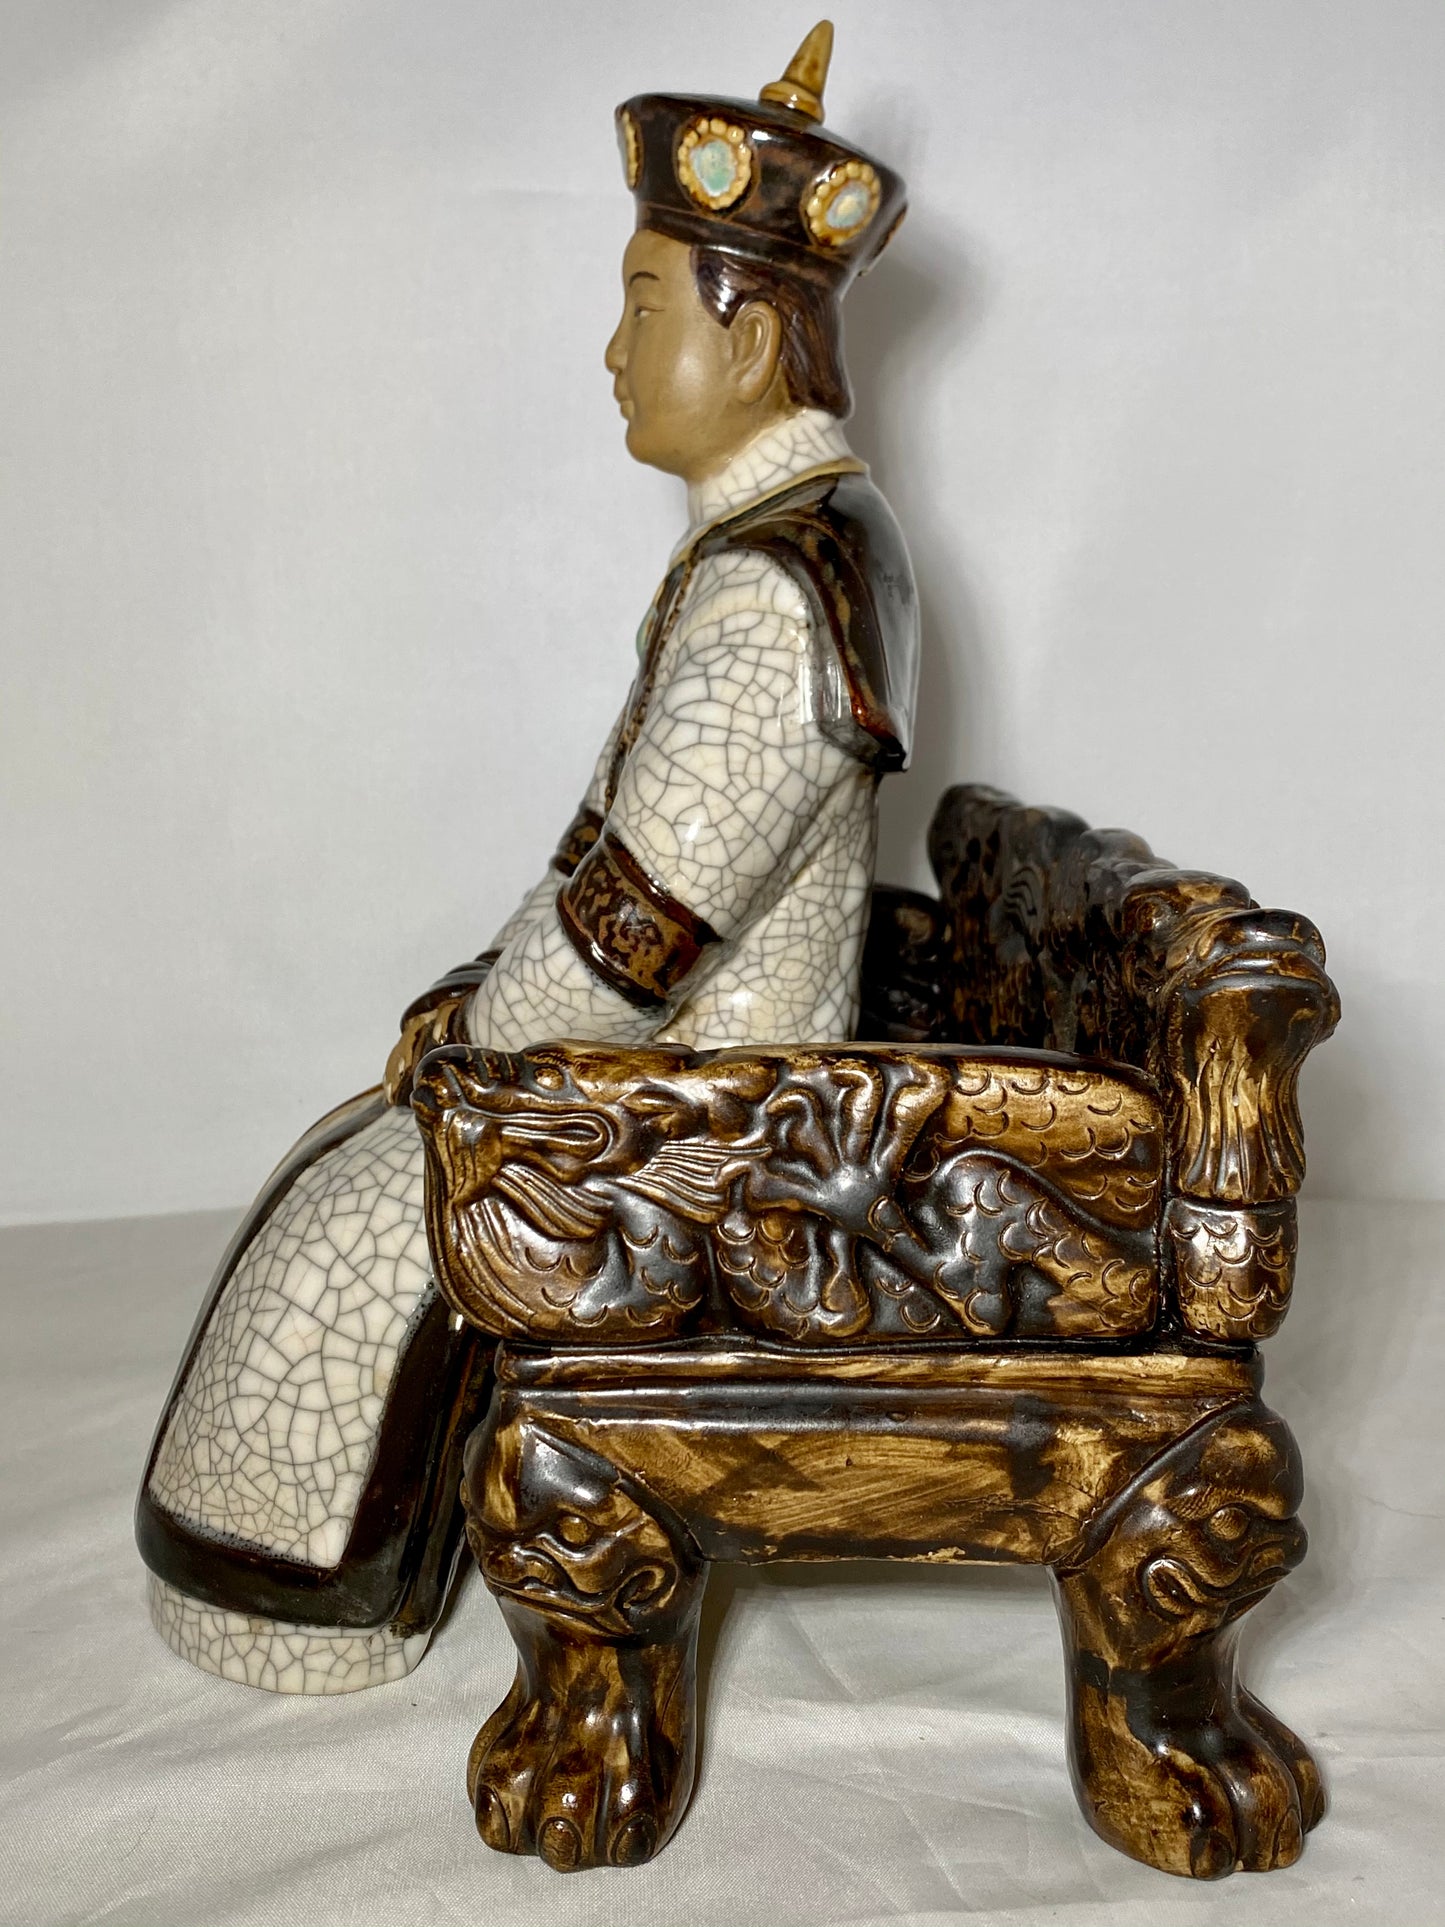 Shiwan Crackle Glaze Statue of Official